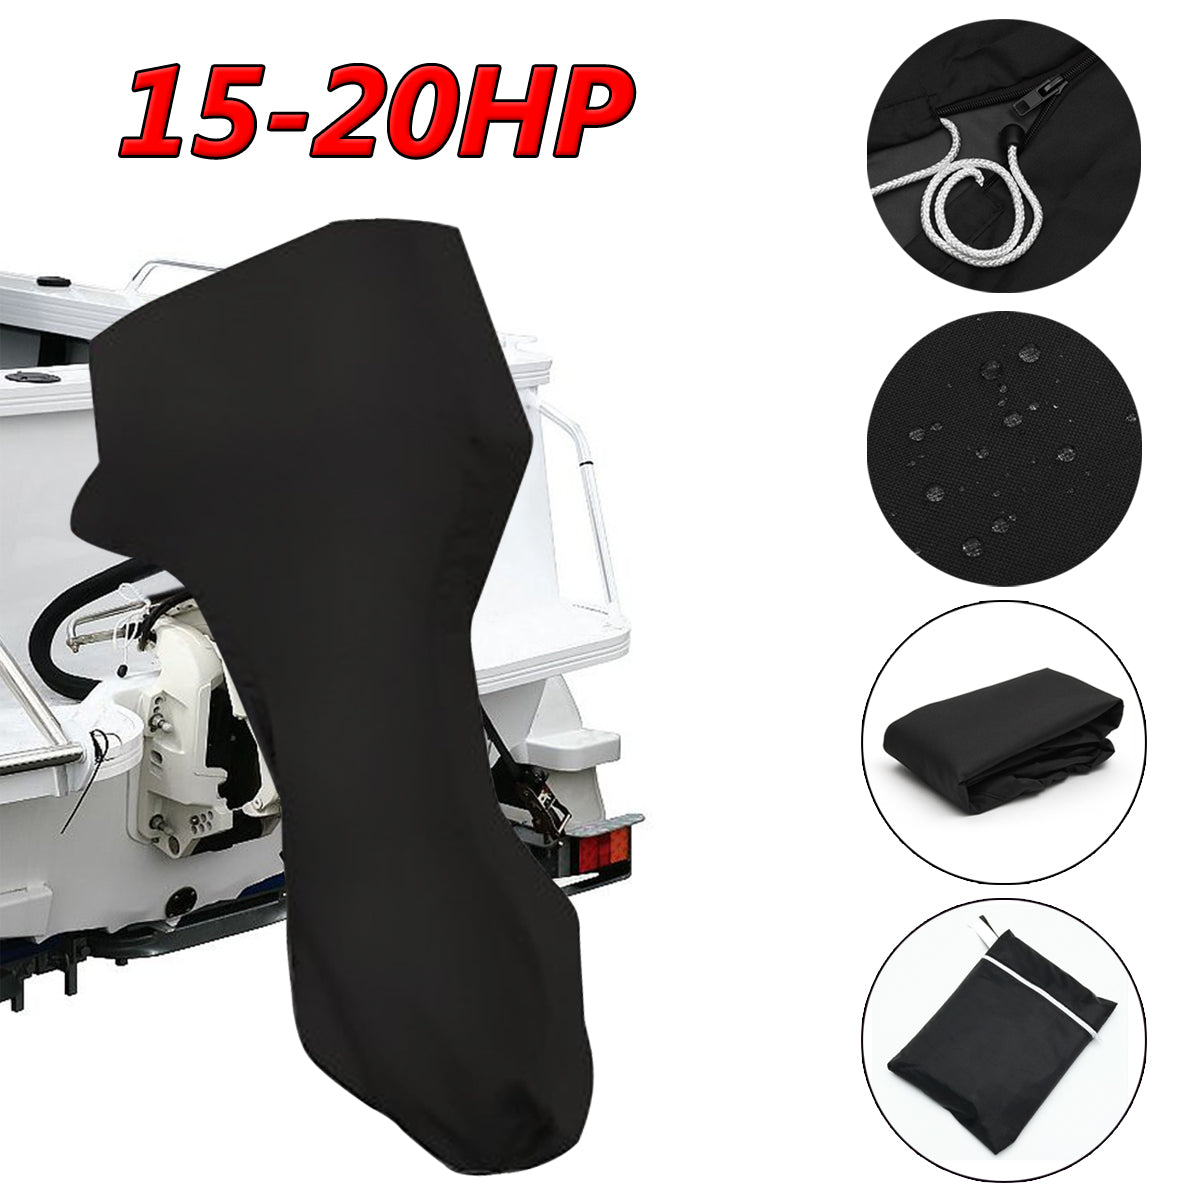 Dark Slate Gray 600D Black Boat Full Outboard Engine Cover Fit For 15-20HP Motor Waterproof